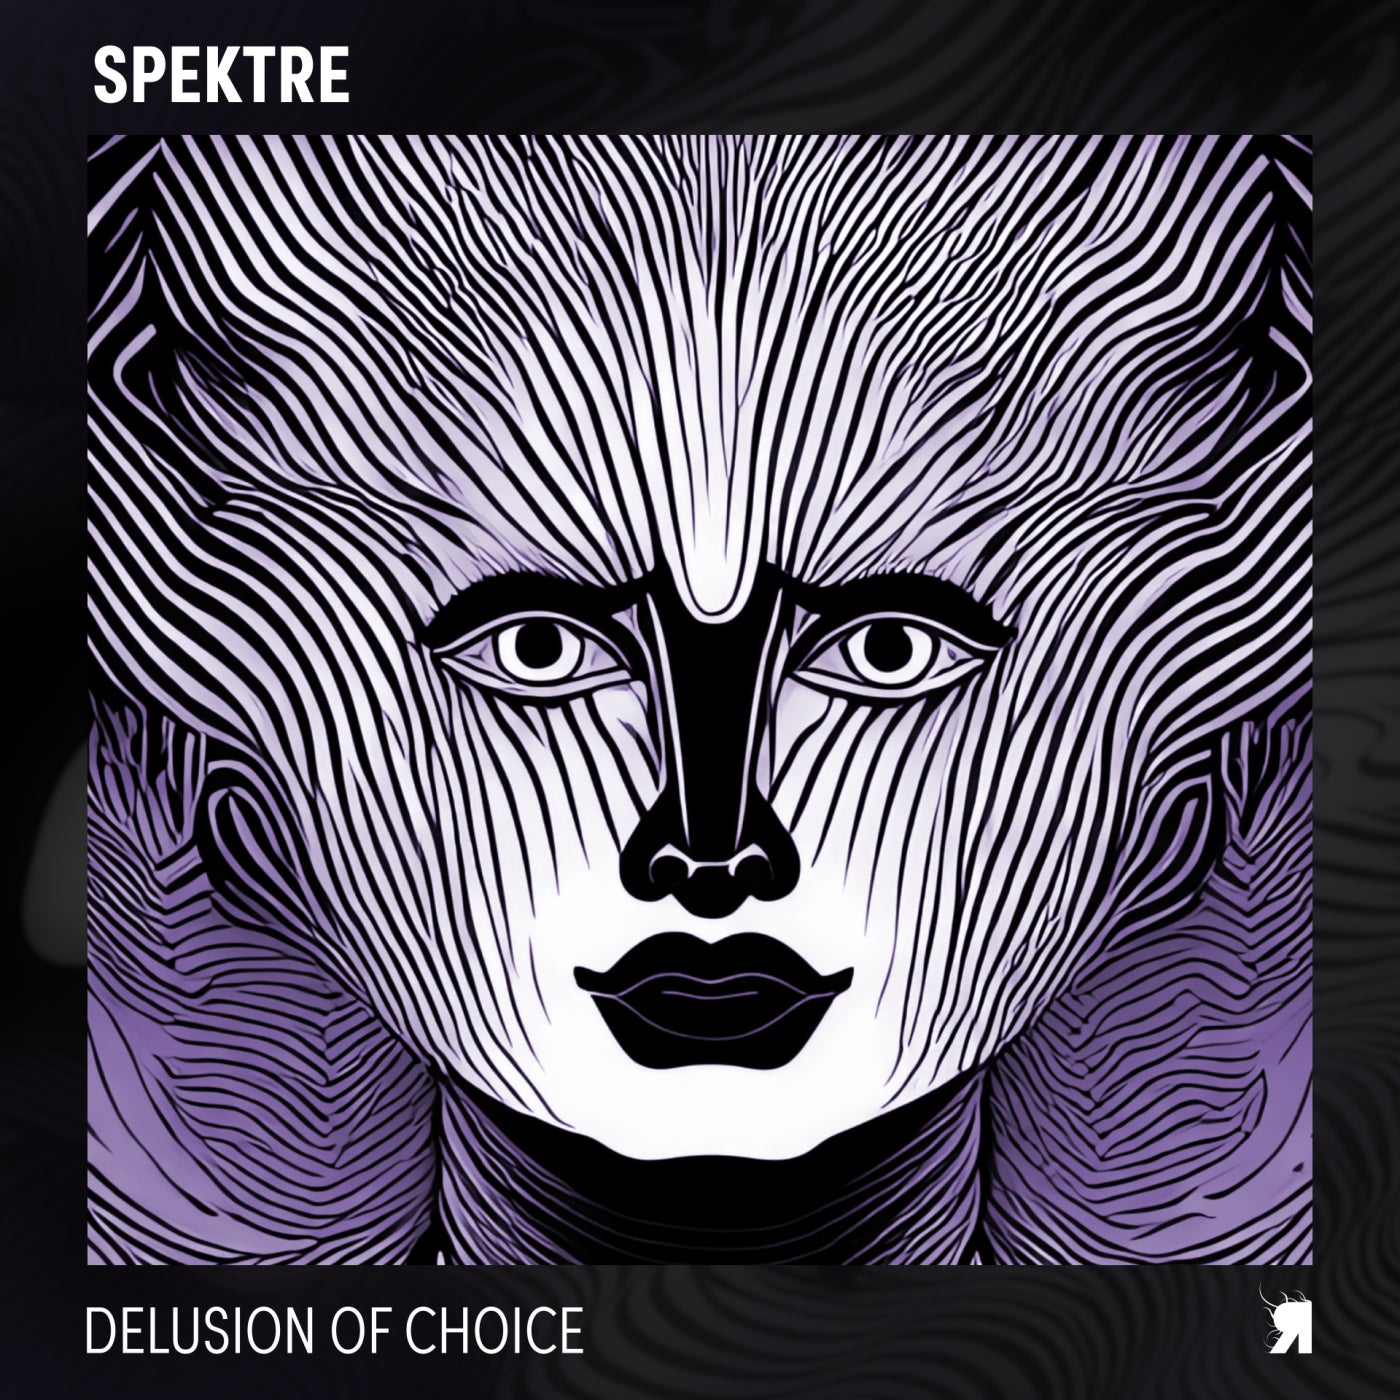 image cover: Spektre - Delusion of Choice on Respekt Recordings